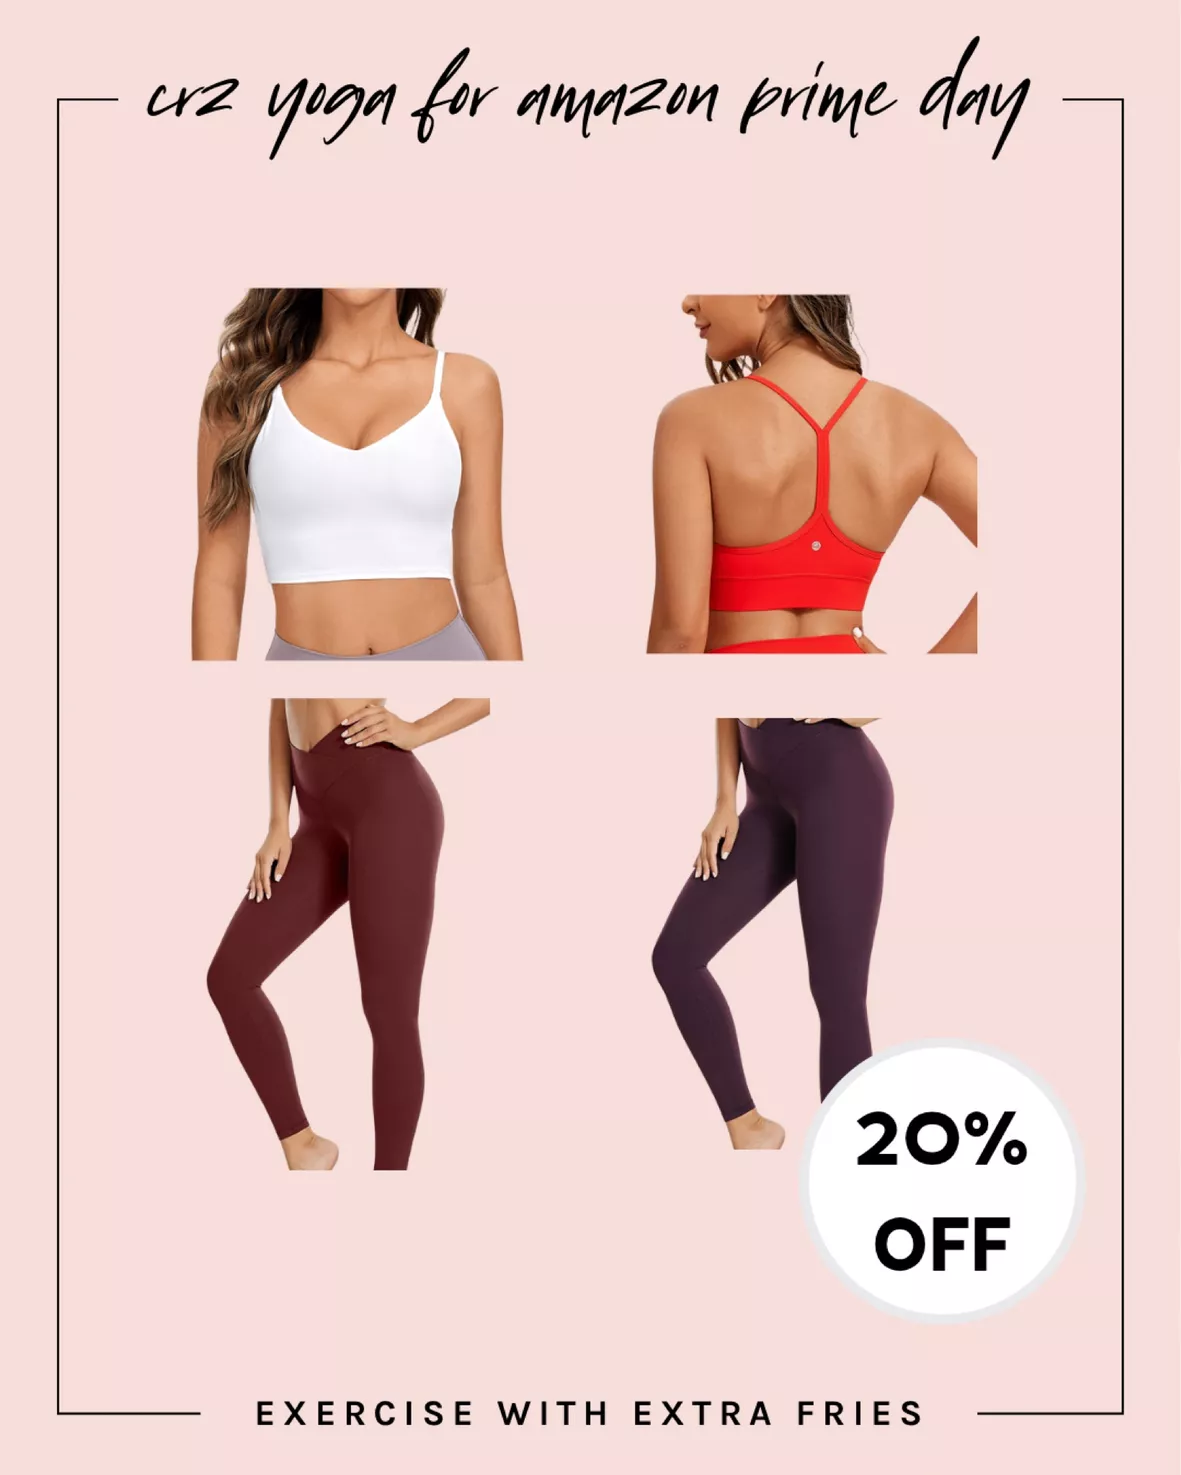 CRZ YOGA Womens Butterluxe … curated on LTK